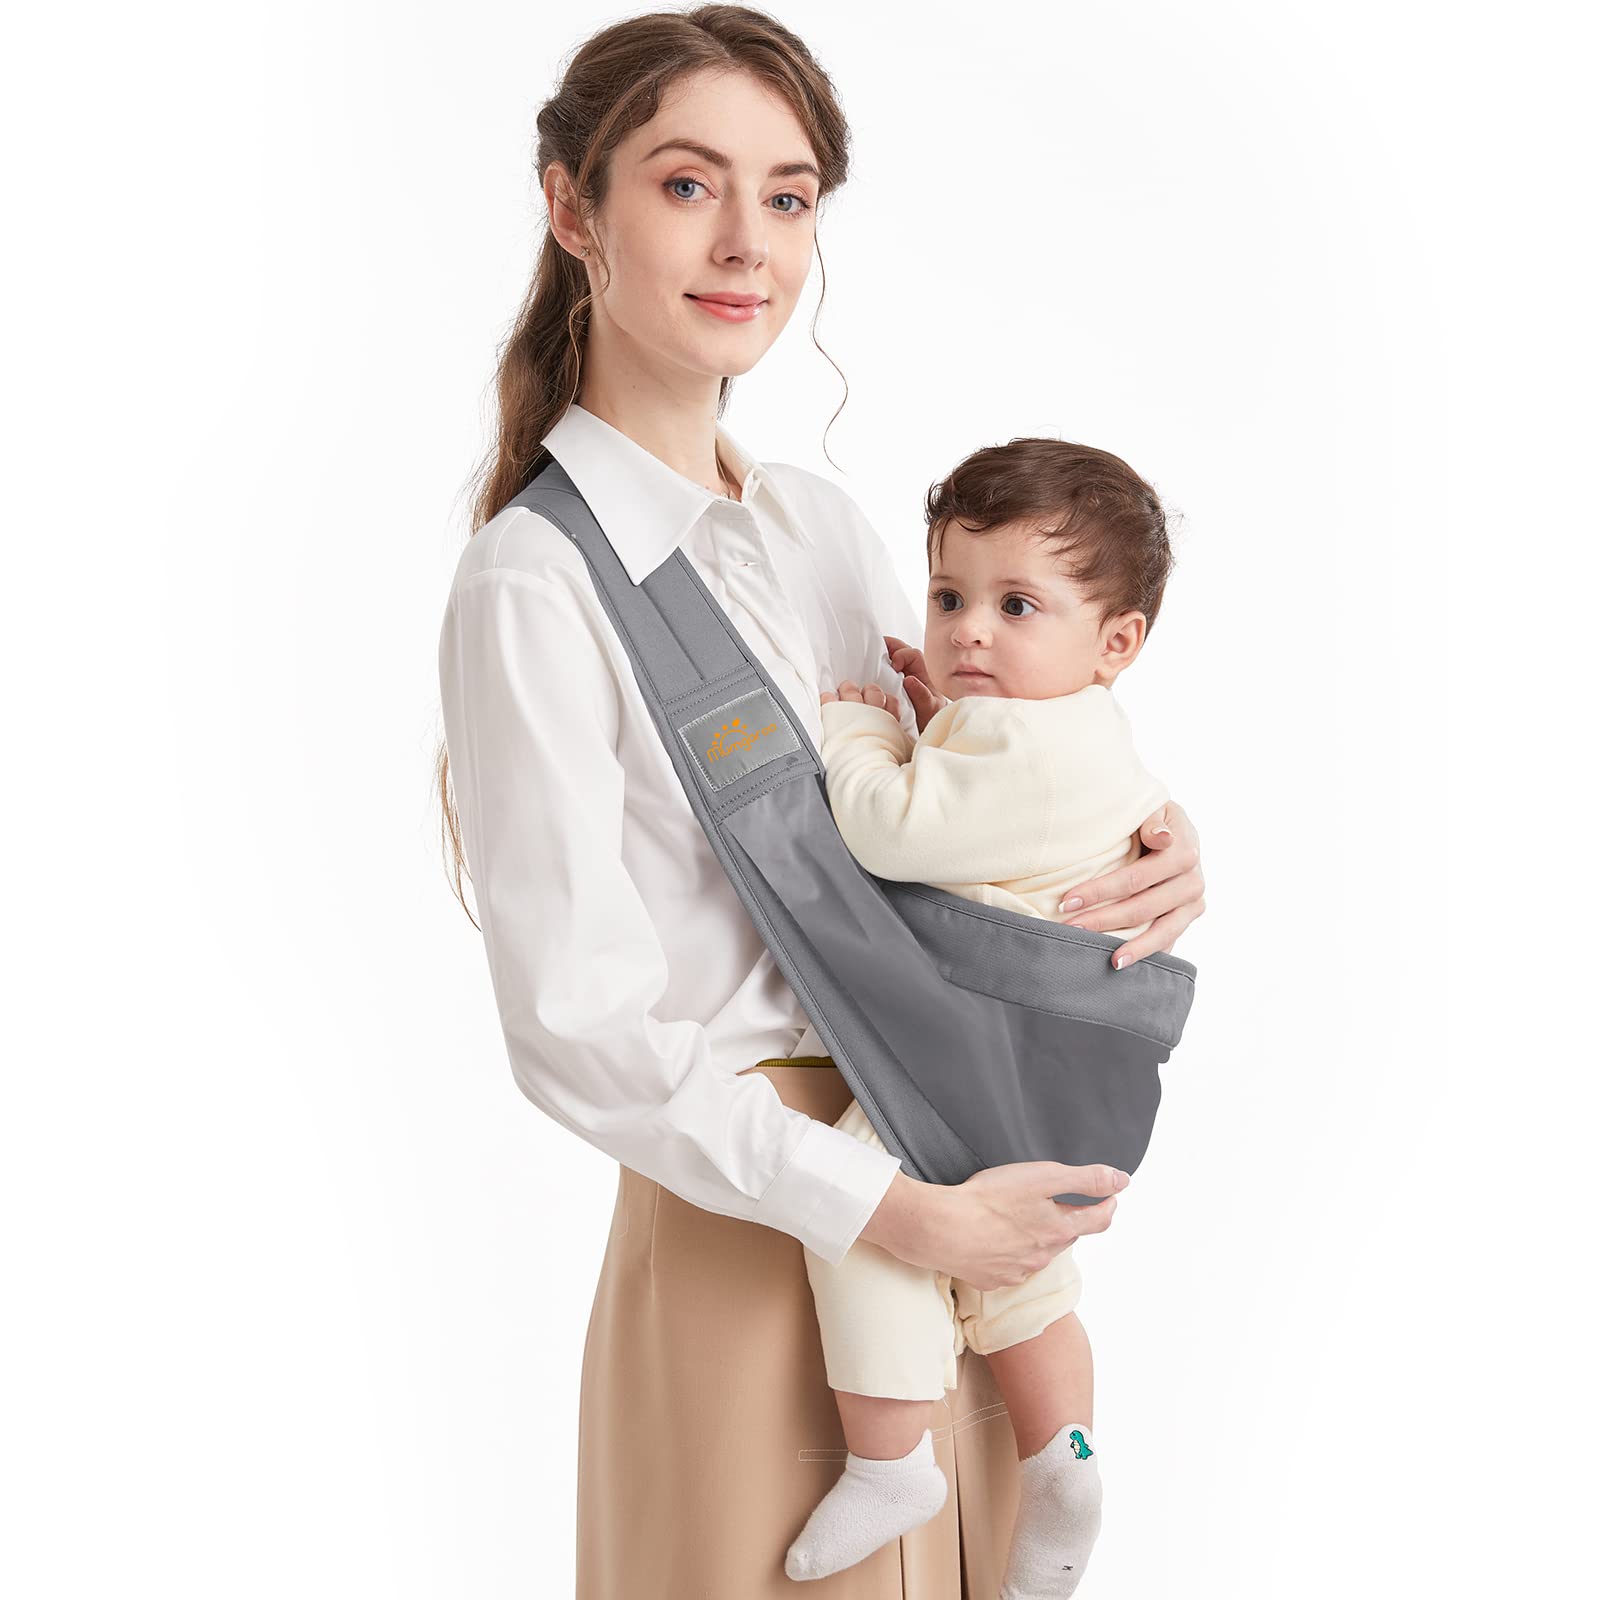 Mumgaroo Toddler Sling Baby Side Carrier, One Shoulder Ergonomically Adjustable Baby Sling Carrier Newborn to Toddler, Quick in & Out Toddler Carrier, One Size Fits All (Solid Color)